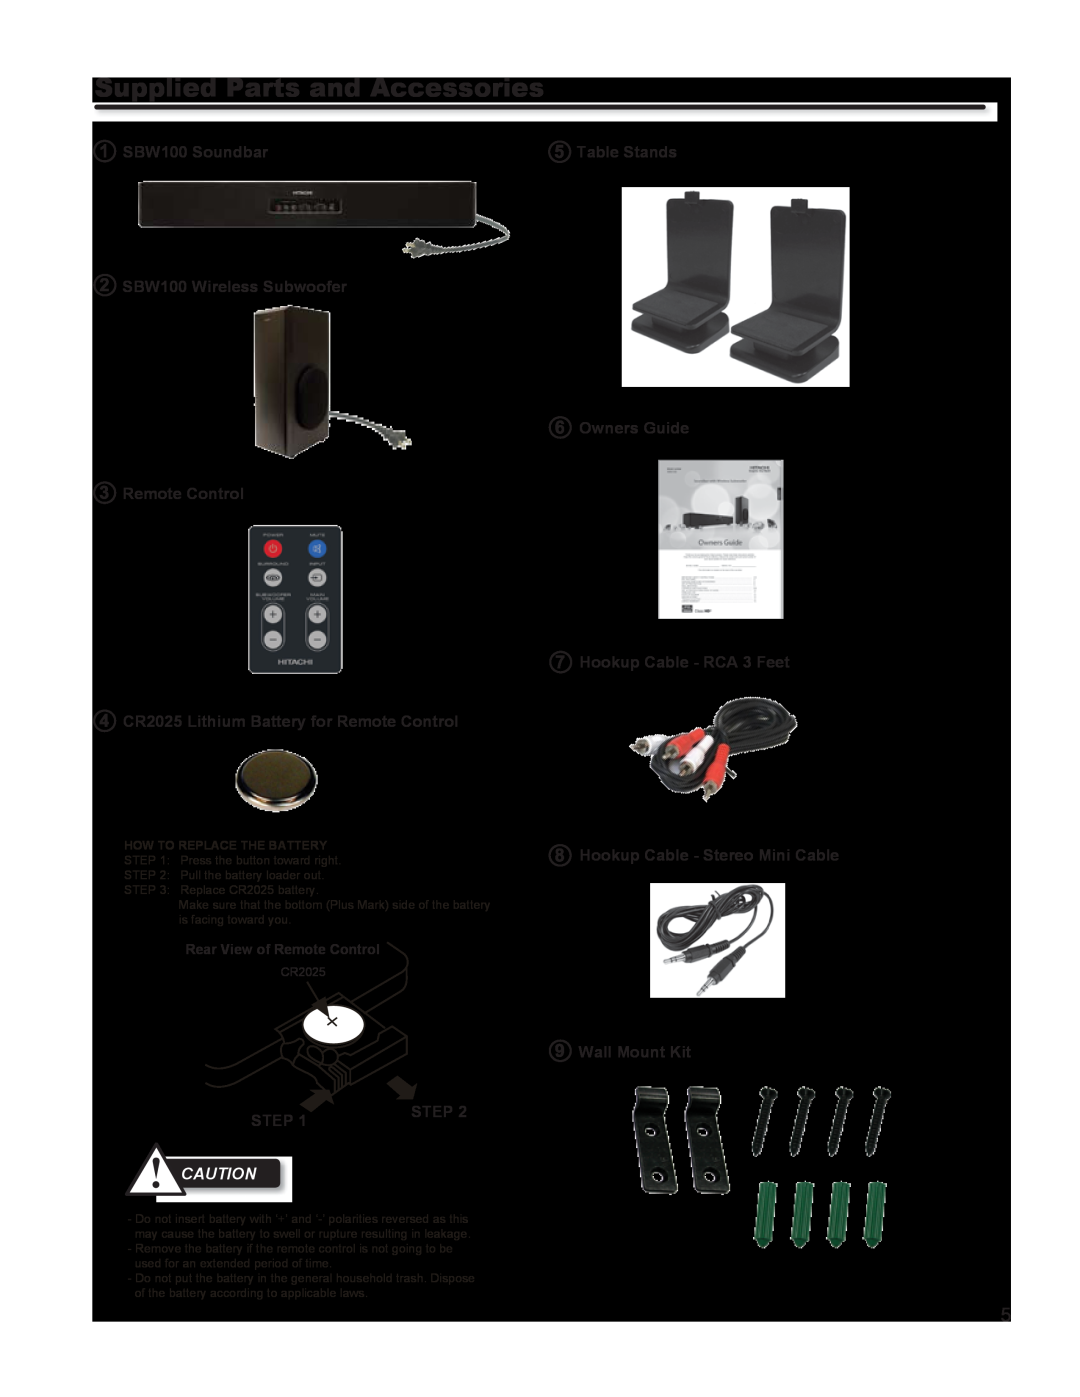 Hitachi Supplied Parts and Accessories, SBW100 Soundbar SBW100 Wireless Subwoofer, Remote Control, Wall Mount Kit, Step 